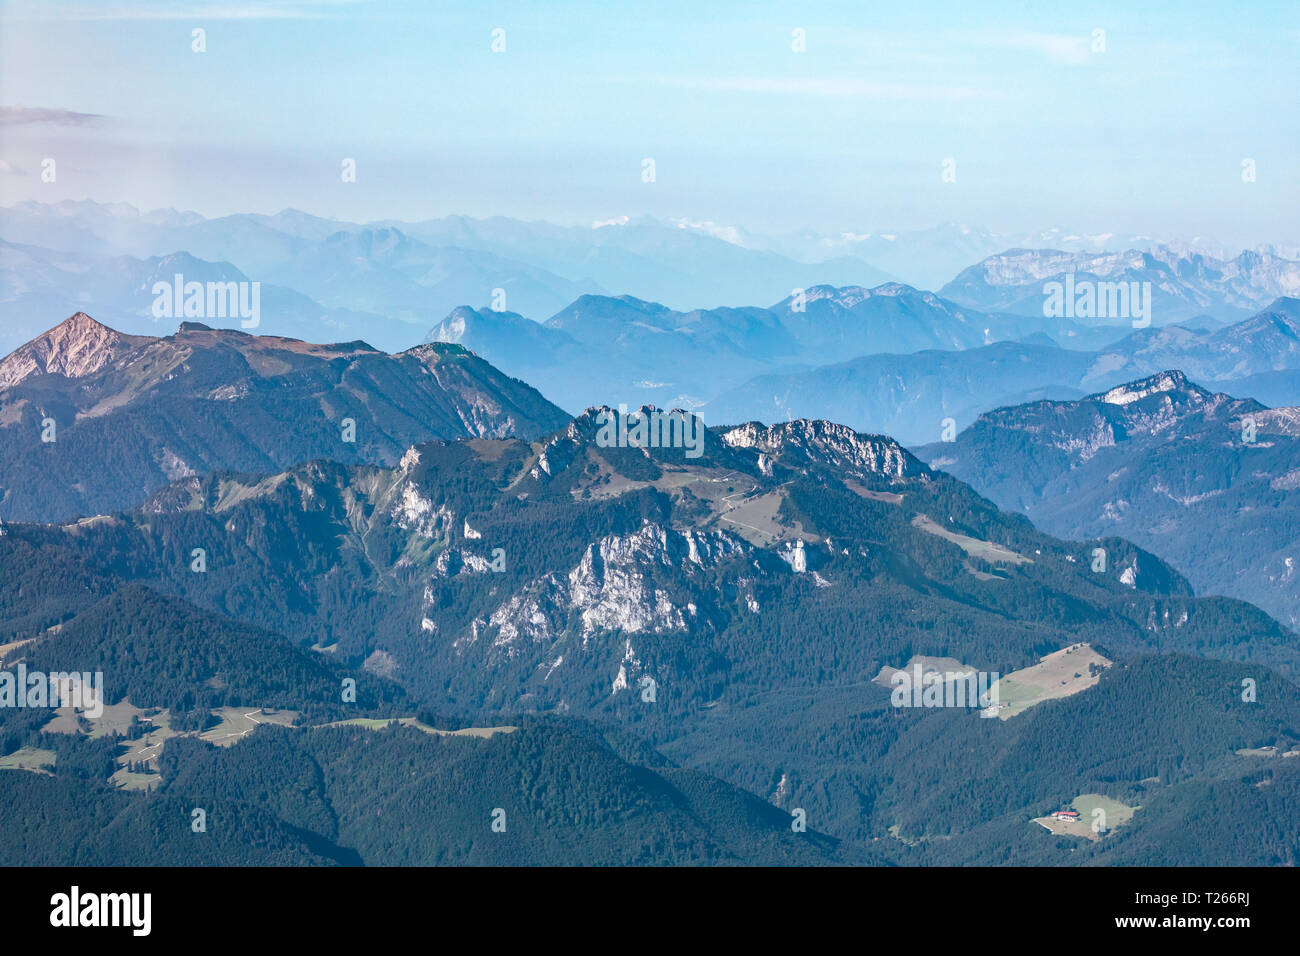 Germany, Bavaria, Chiemgau, Bavarian Prealps in the foreground, Alps in the background Stock Photo